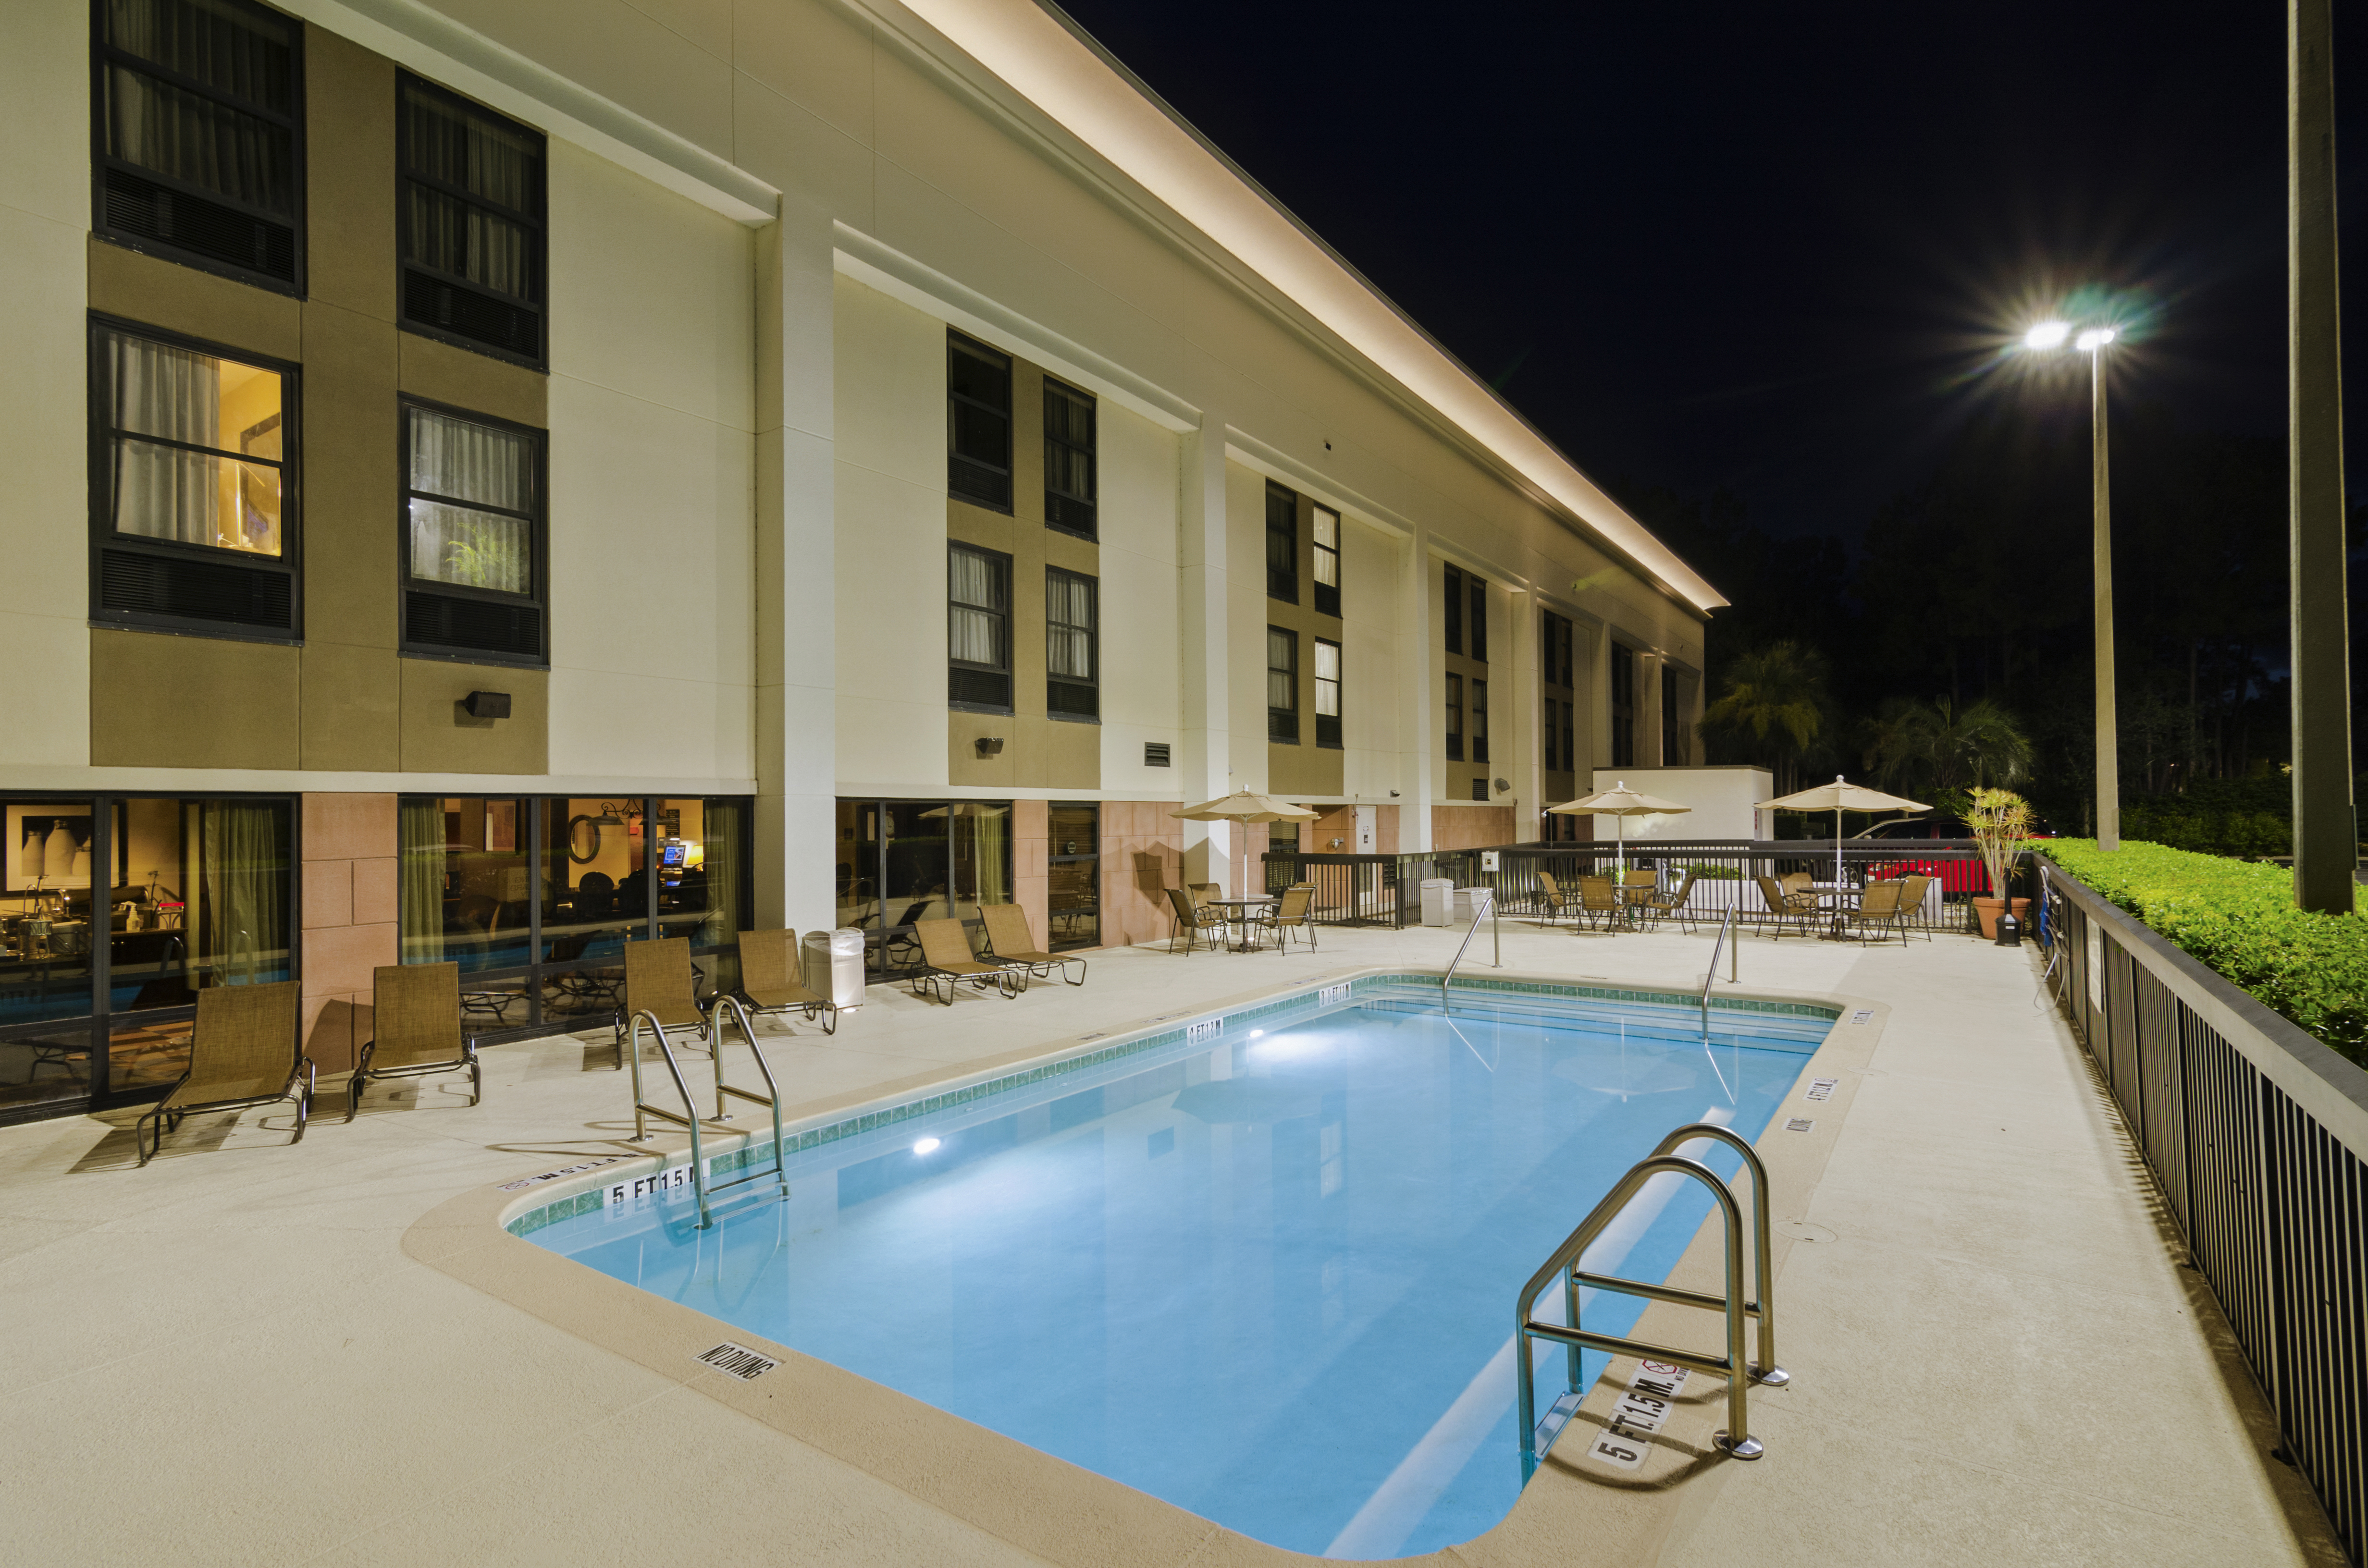 Outdoor Pool at Night